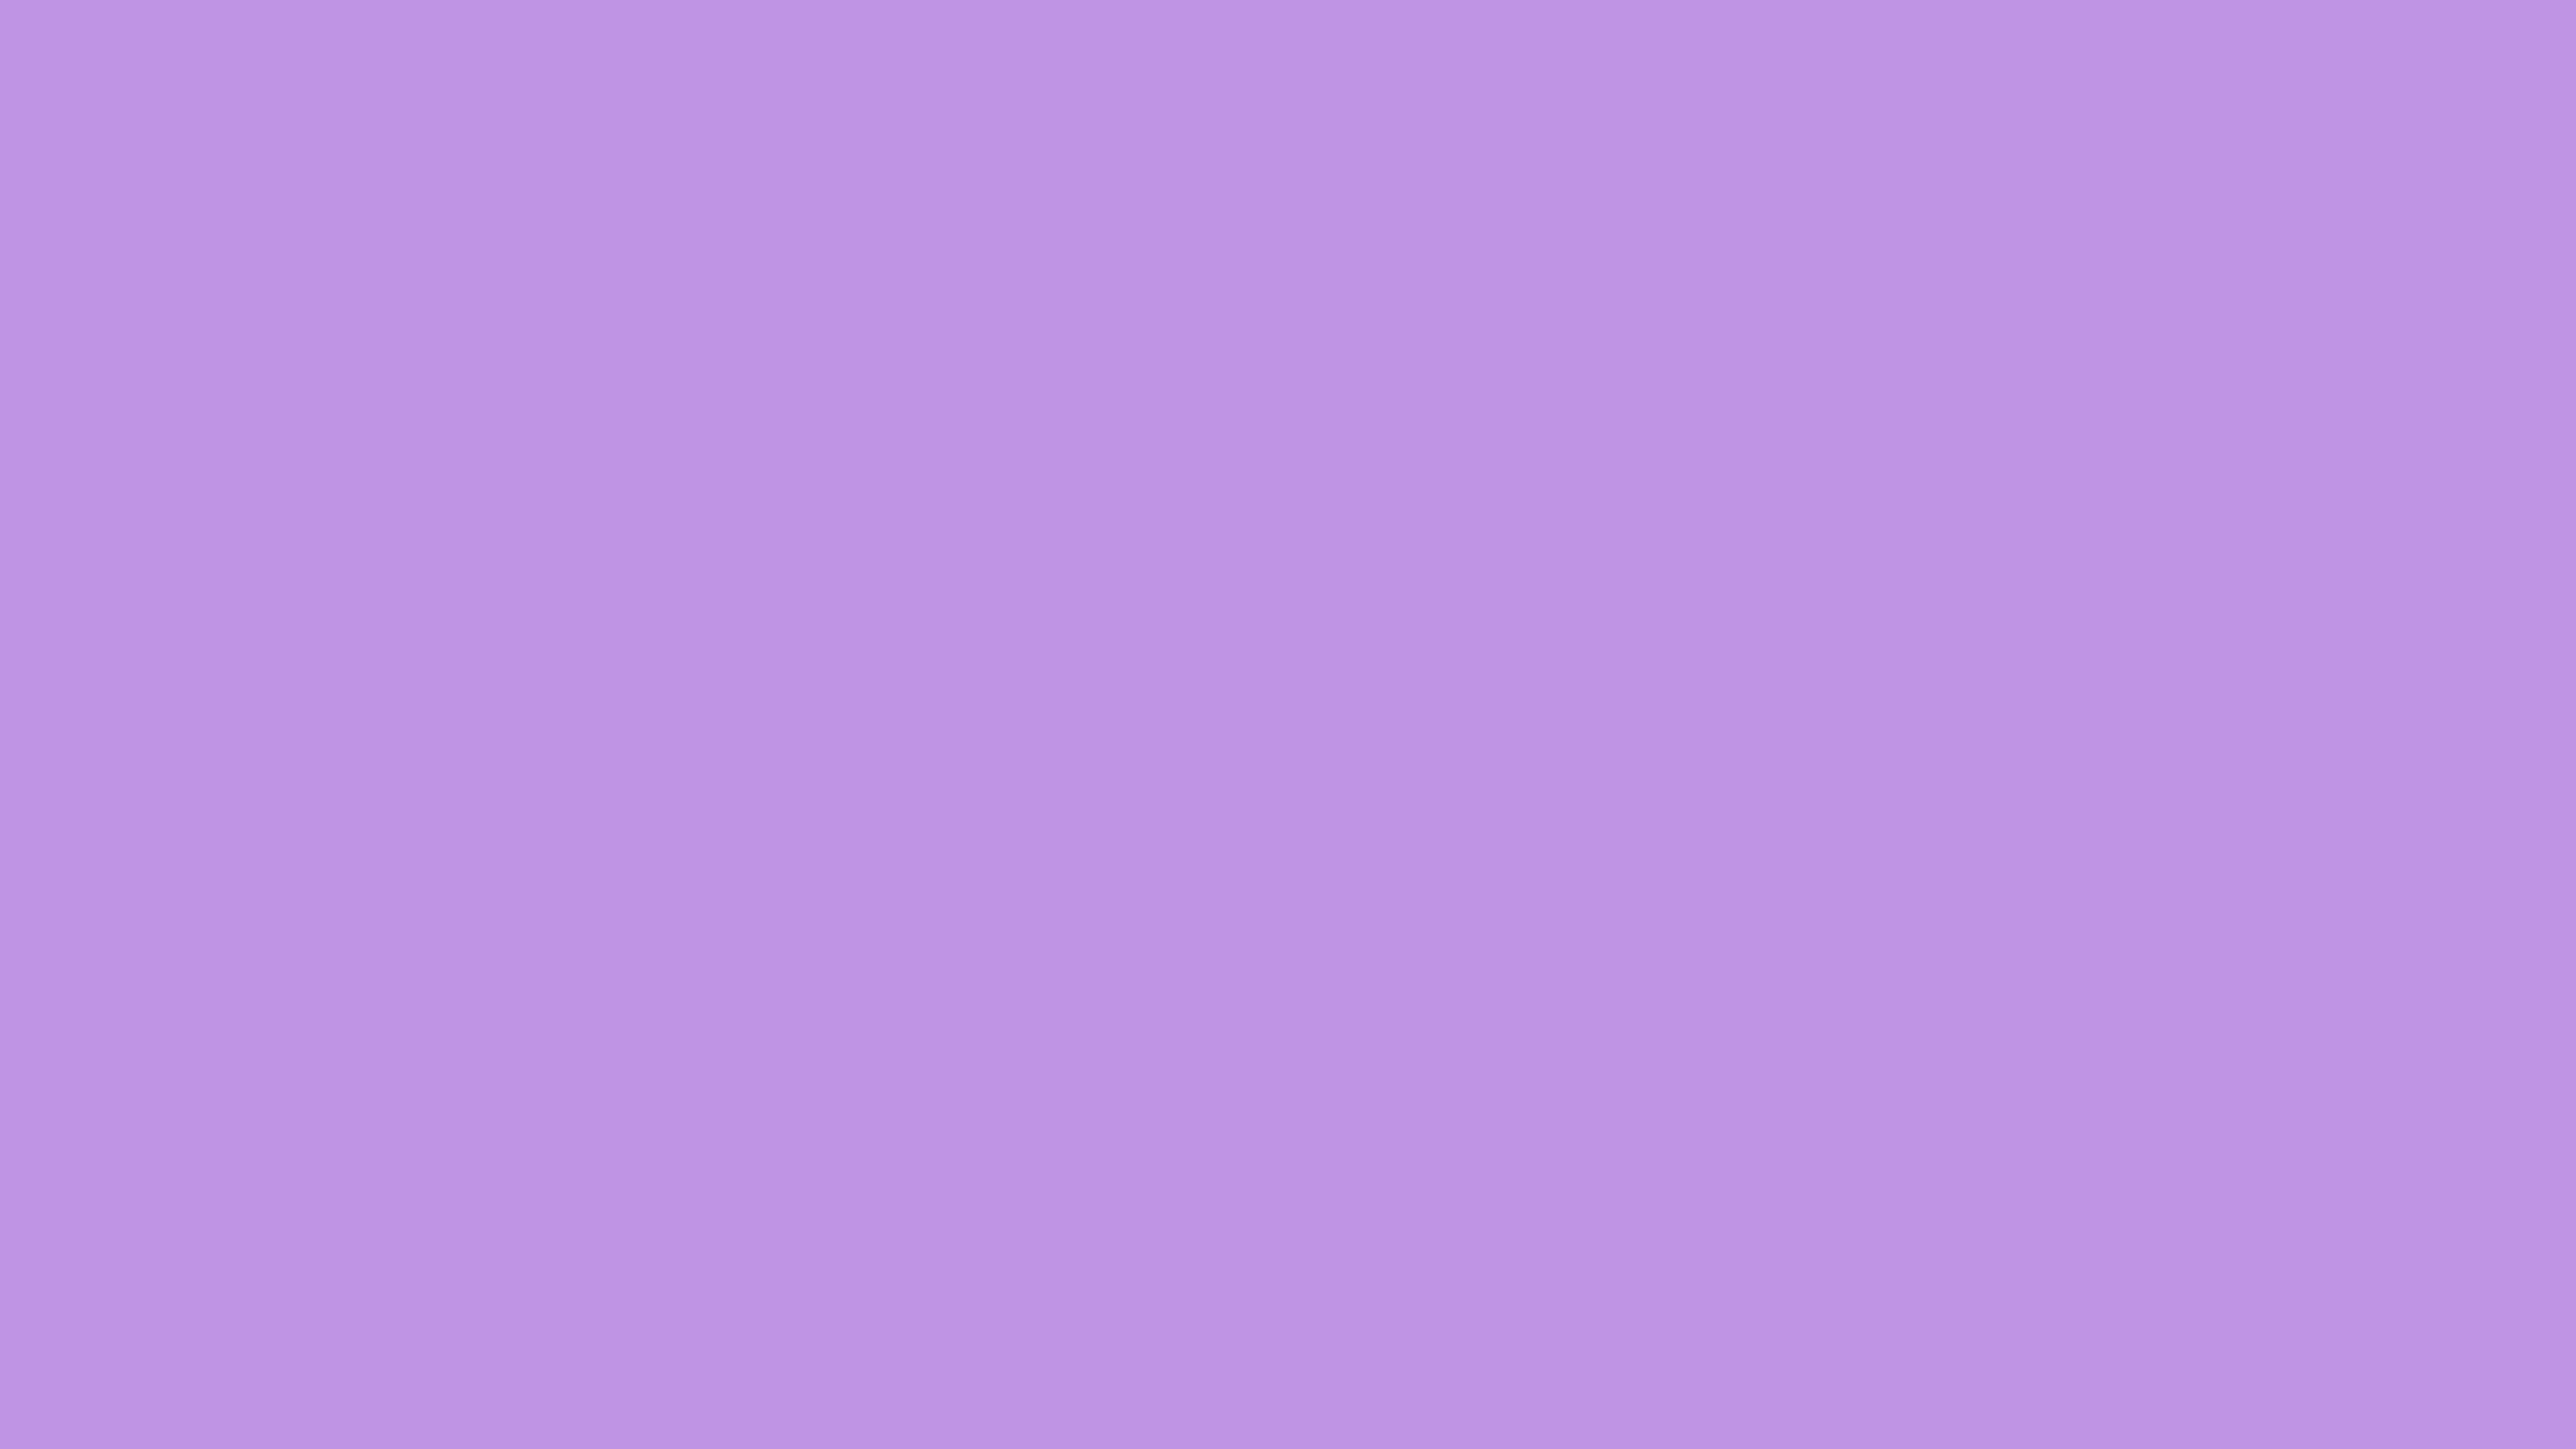 7680x4320 Bright Lavender Solid Color Background